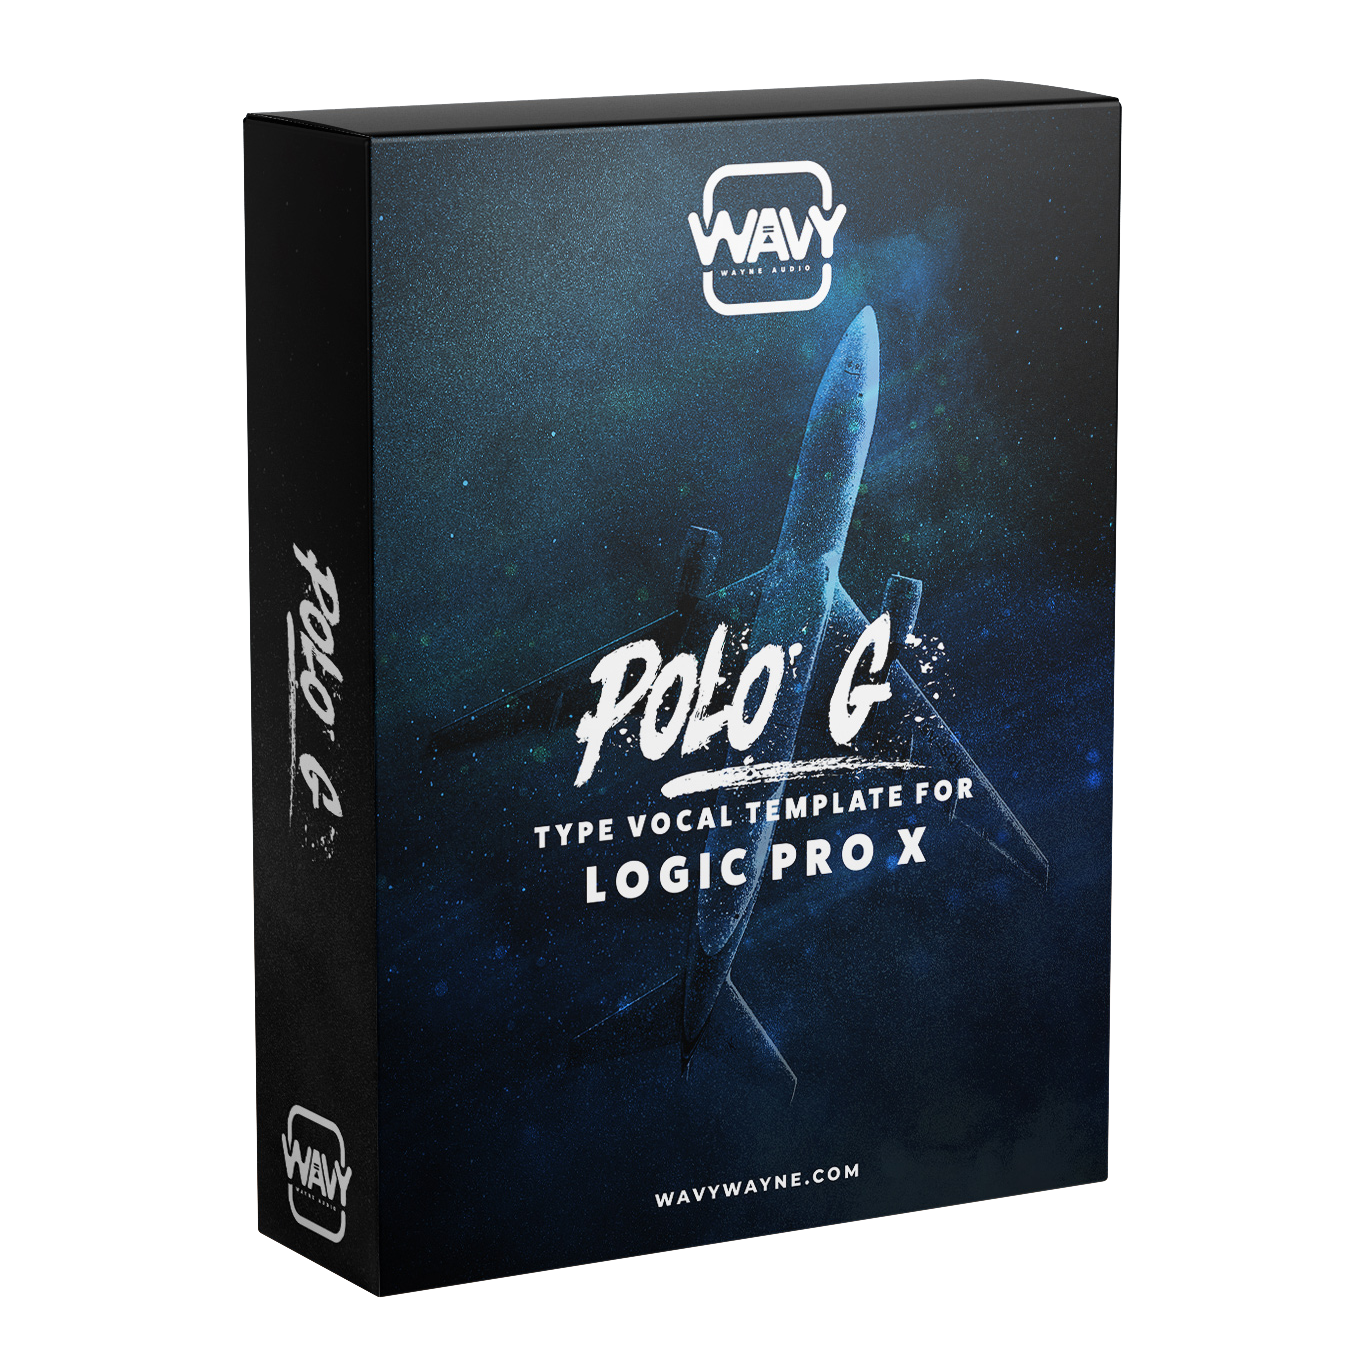 Polo G Type Template for Logic Pro X